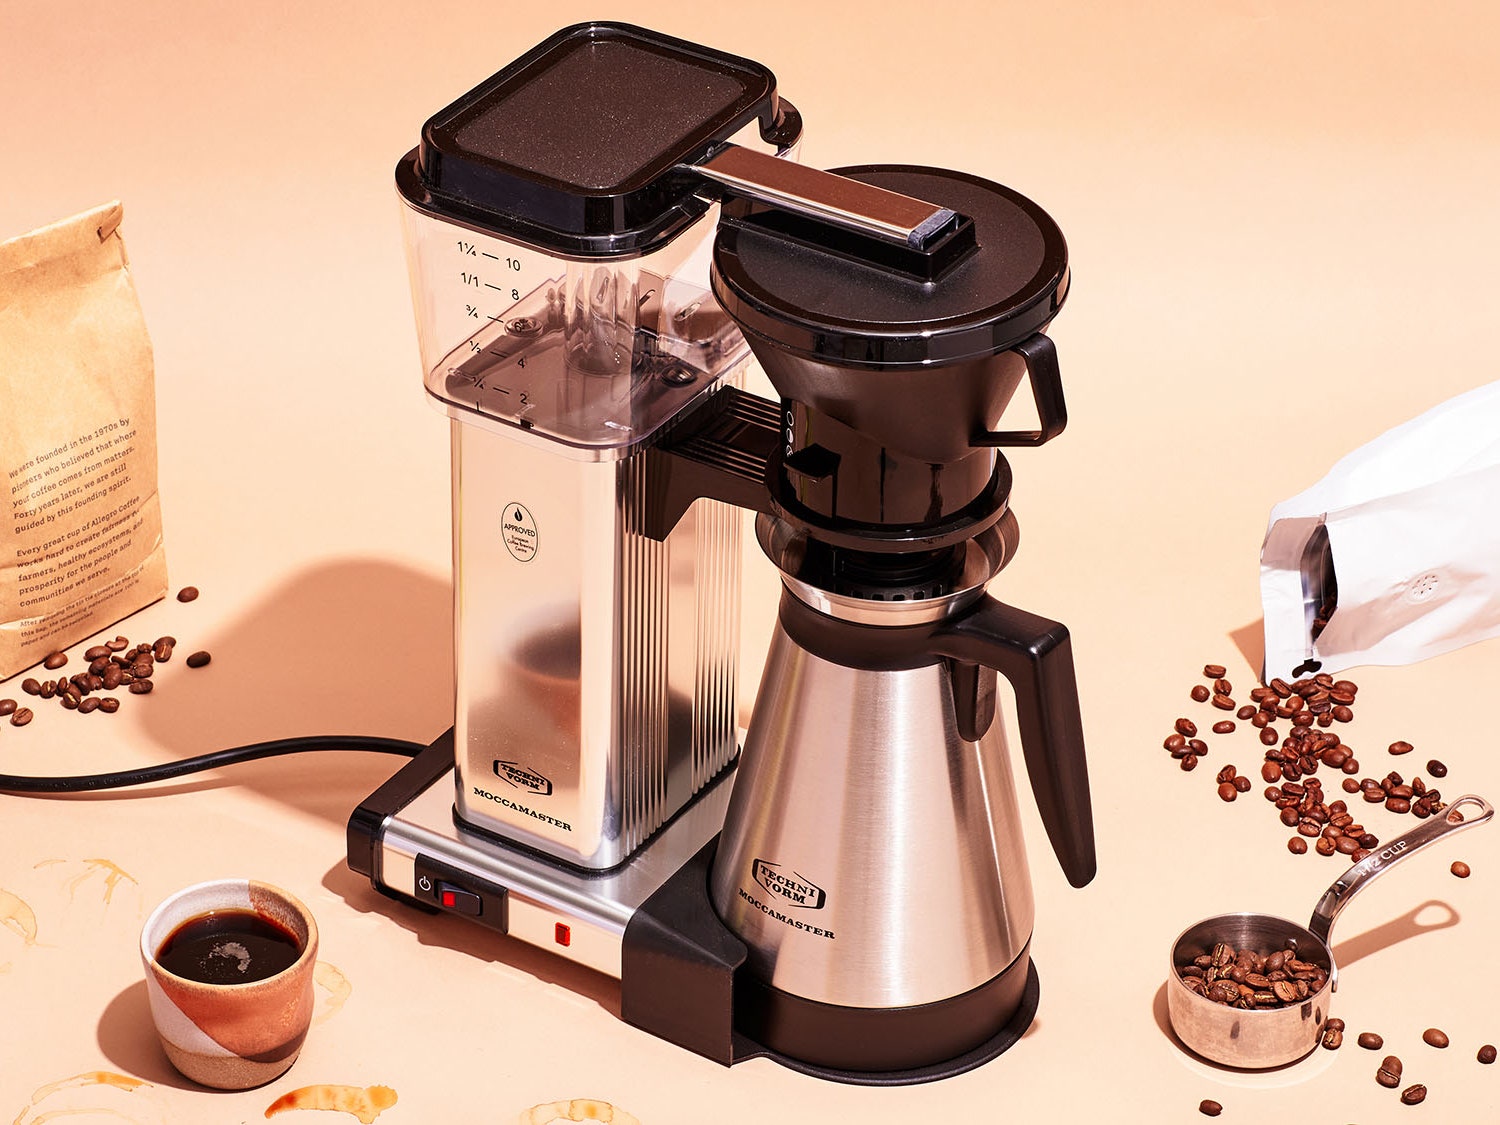 The Best Drip Coffee Makers for When You Need Delicious Cup Right Now